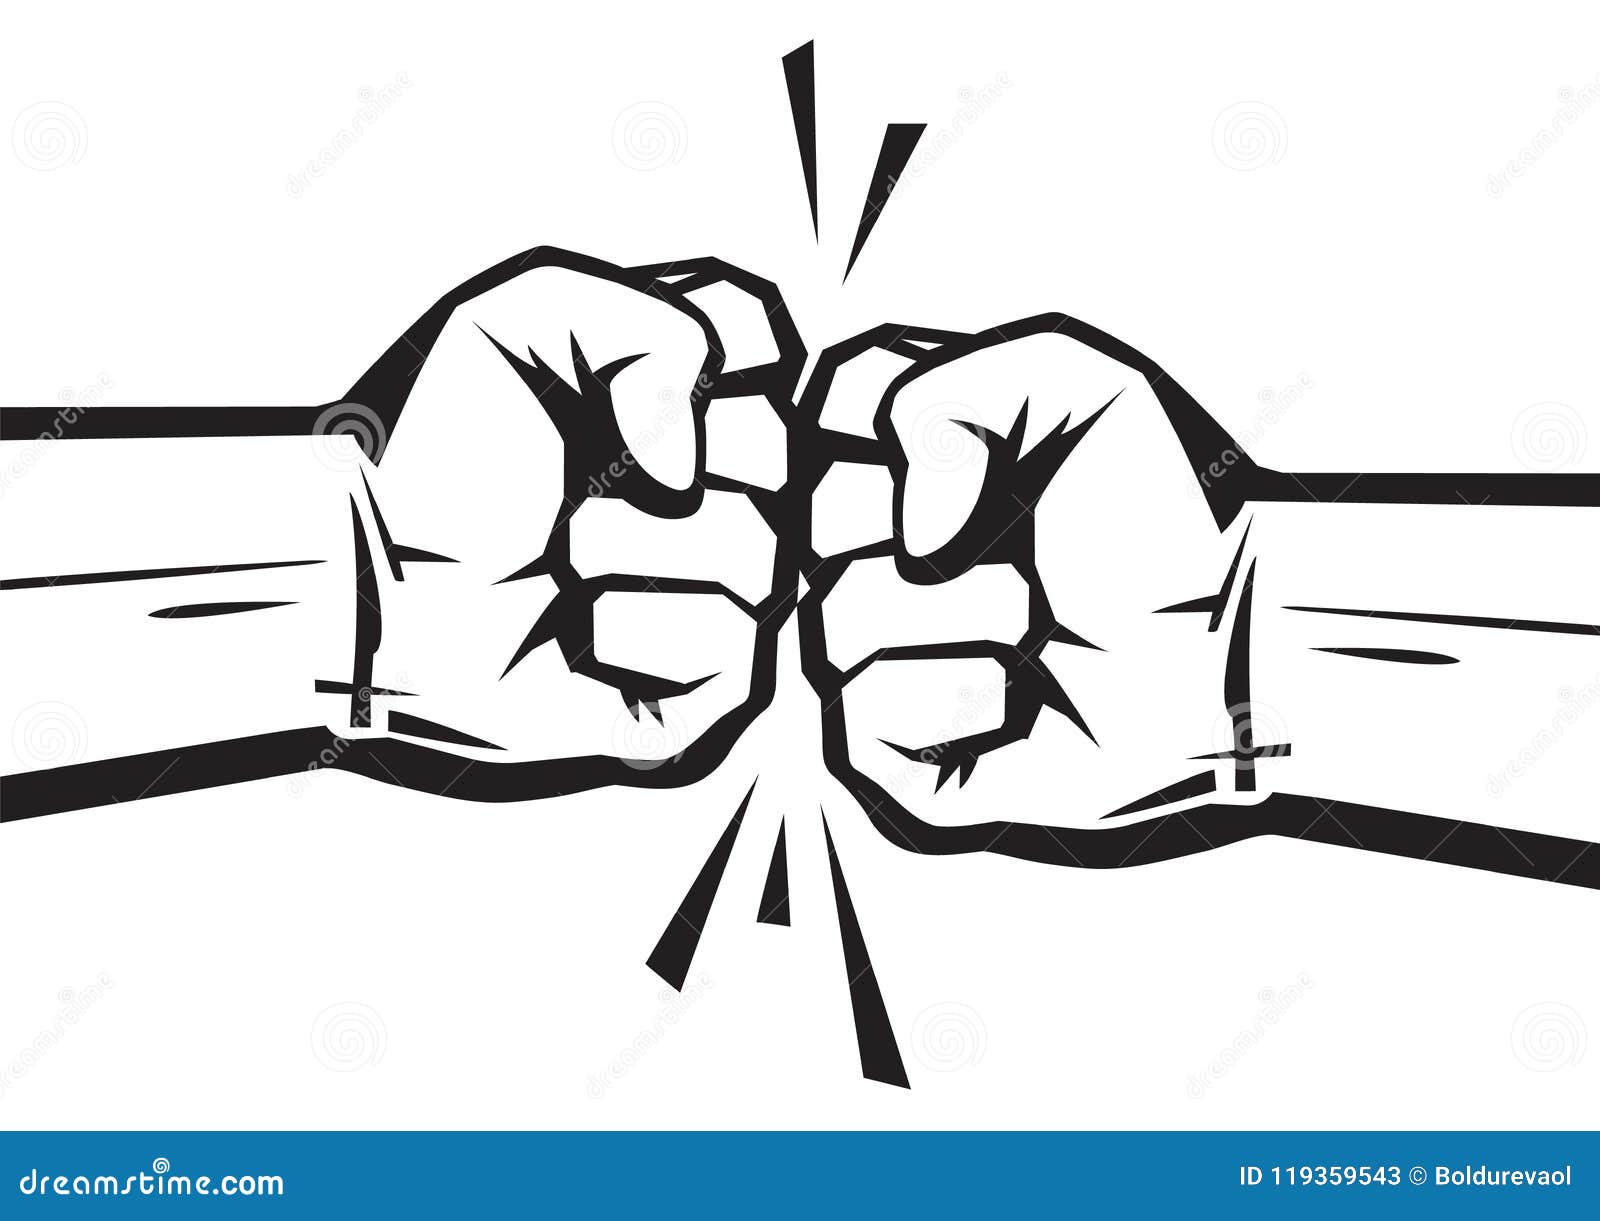 Download Two Clenched Fists Bumping Together Stock Vector ...